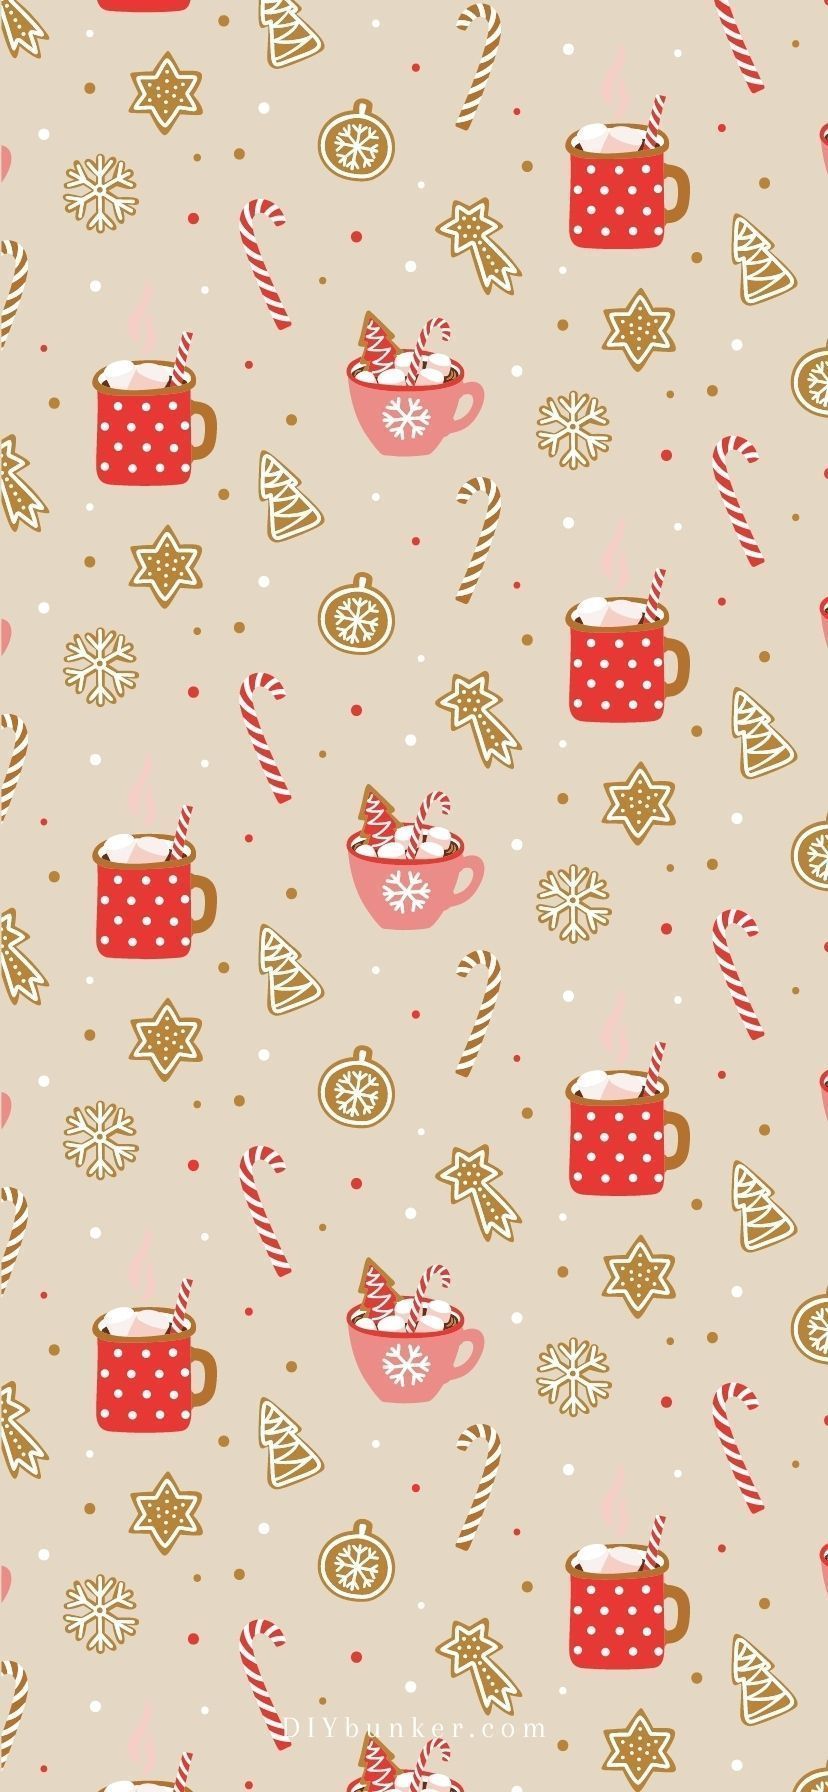 A pattern with candy canes, coffee cups and other items - Christmas, Christmas iPhone, cute Christmas